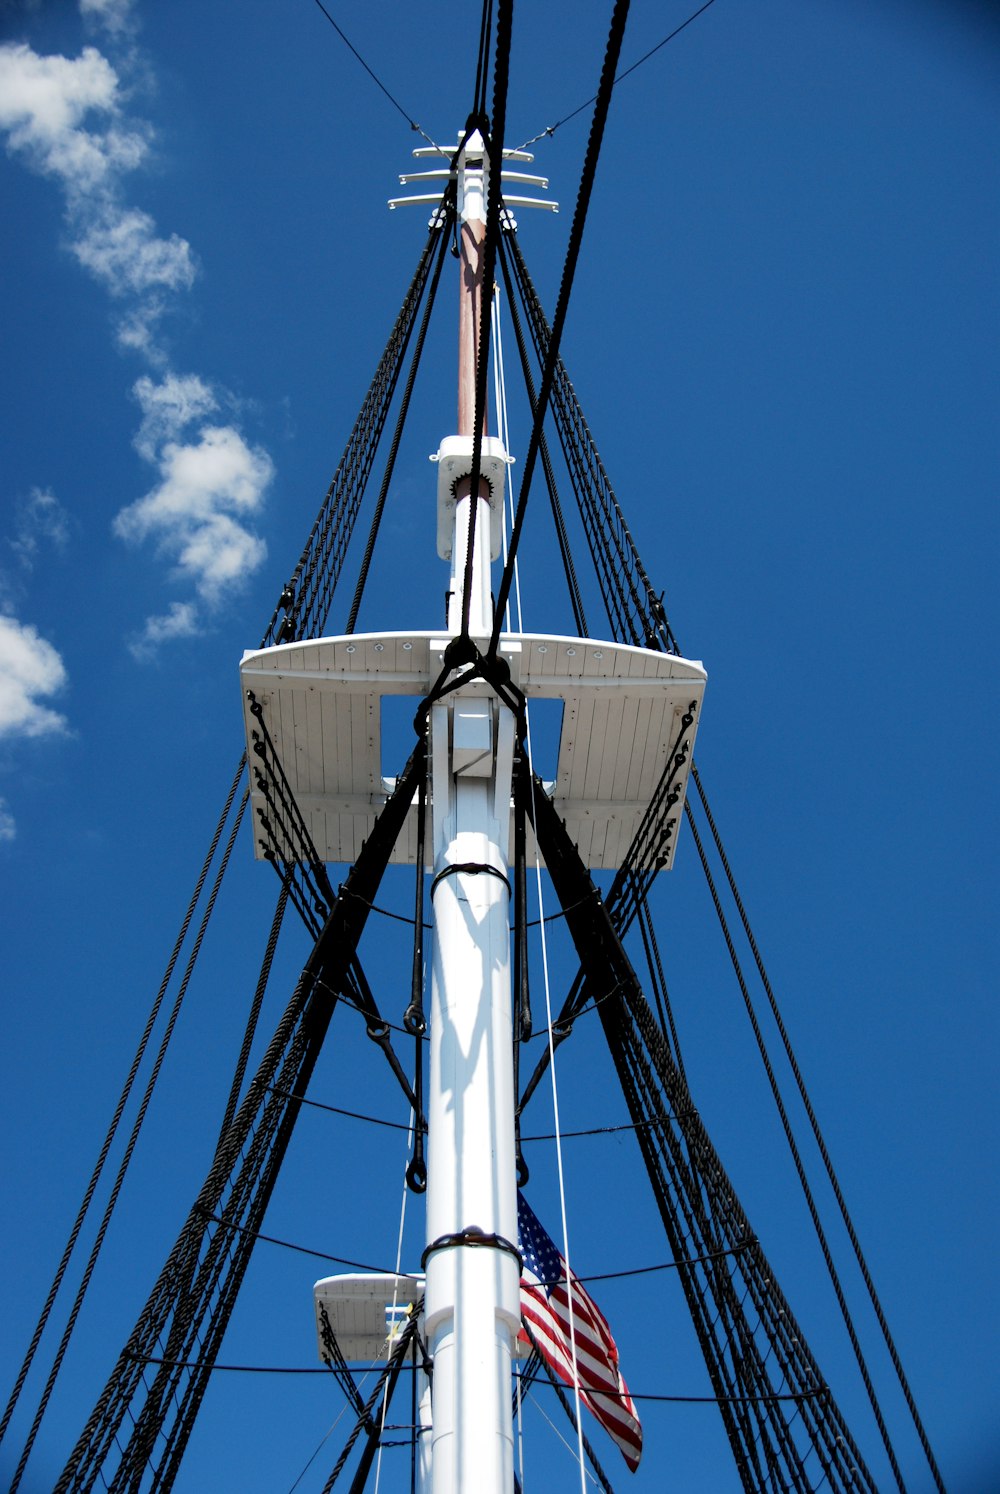 white and black sail boat under blue sky during daytime